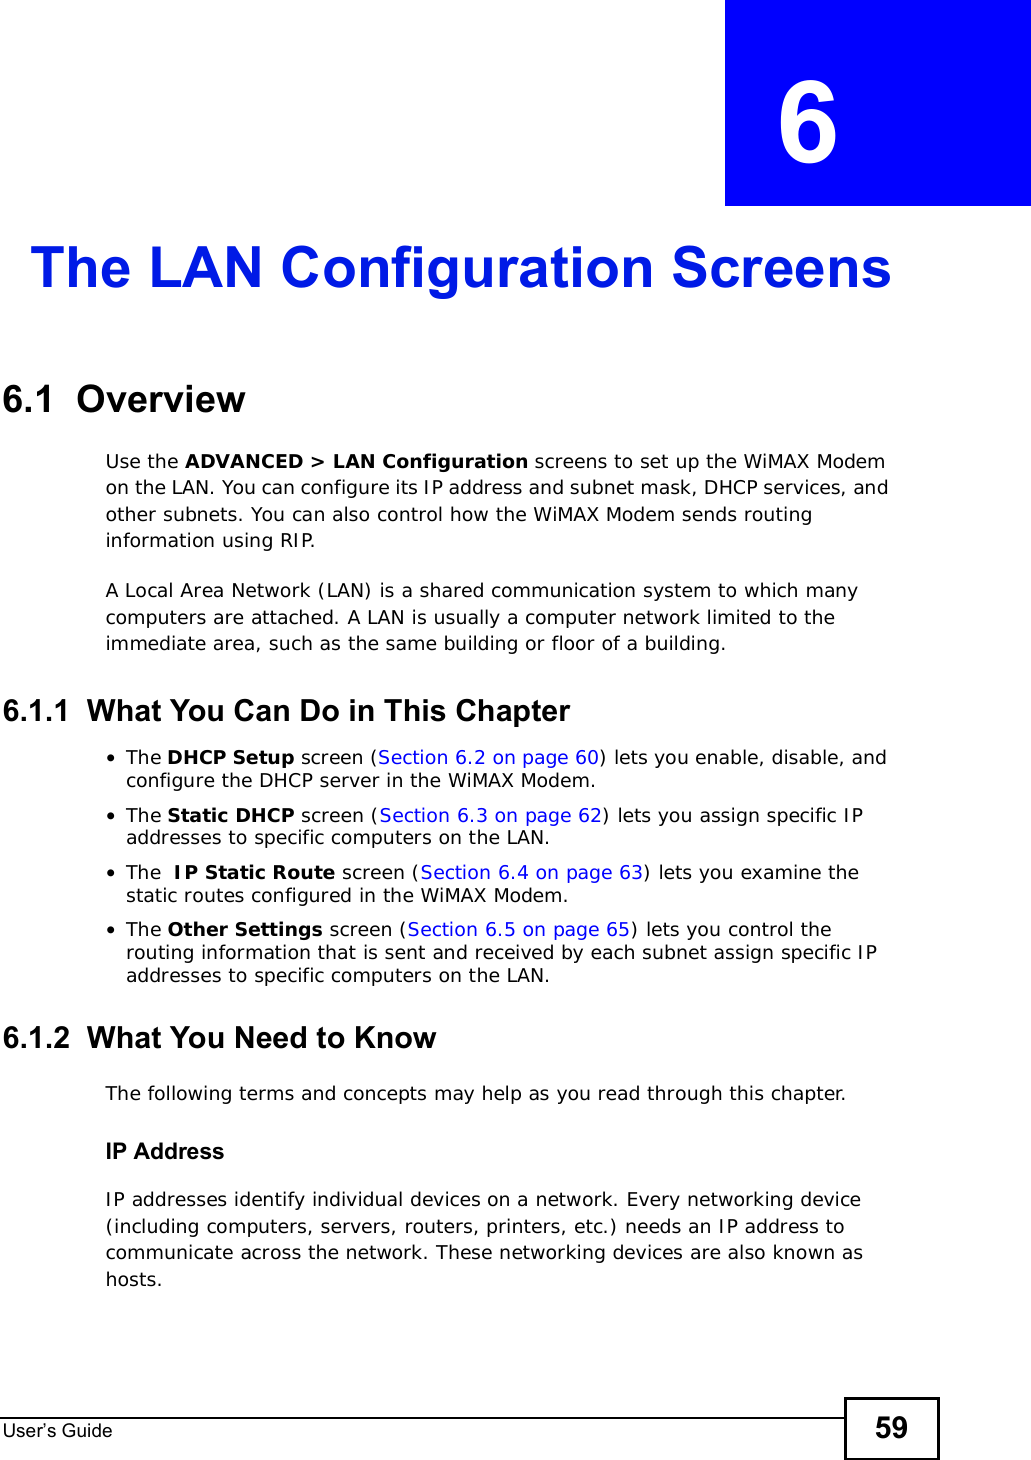 User s Guide 59CHAPTER  6 The LAN Configuration Screens6.1  OverviewUse the ADVANCED &gt; LAN Configuration screens to set up the WiMAX Modem on the LAN. You can configure its IP address and subnet mask, DHCP services, and other subnets. You can also control how the WiMAX Modem sends routing information using RIP.A Local Area Network (LAN) is a shared communication system to which many computers are attached. A LAN is usually a computer network limited to the immediate area, such as the same building or floor of a building.6.1.1  What You Can Do in This Chapter•The DHCP Setup screen (Section 6.2 on page 60) lets you enable, disable, and configure the DHCP server in the WiMAX Modem.•The Static DHCP screen (Section 6.3 on page 62) lets you assign specific IP addresses to specific computers on the LAN.•The  IP Static Route screen (Section 6.4 on page 63) lets you examine the static routes configured in the WiMAX Modem.•The Other Settings screen (Section 6.5 on page 65) lets you control the routing information that is sent and received by each subnet assign specific IP addresses to specific computers on the LAN.6.1.2  What You Need to KnowThe following terms and concepts may help as you read through this chapter.IP AddressIP addresses identify individual devices on a network. Every networking device (including computers, servers, routers, printers, etc.) needs an IP address to communicate across the network. These networking devices are also known as hosts.